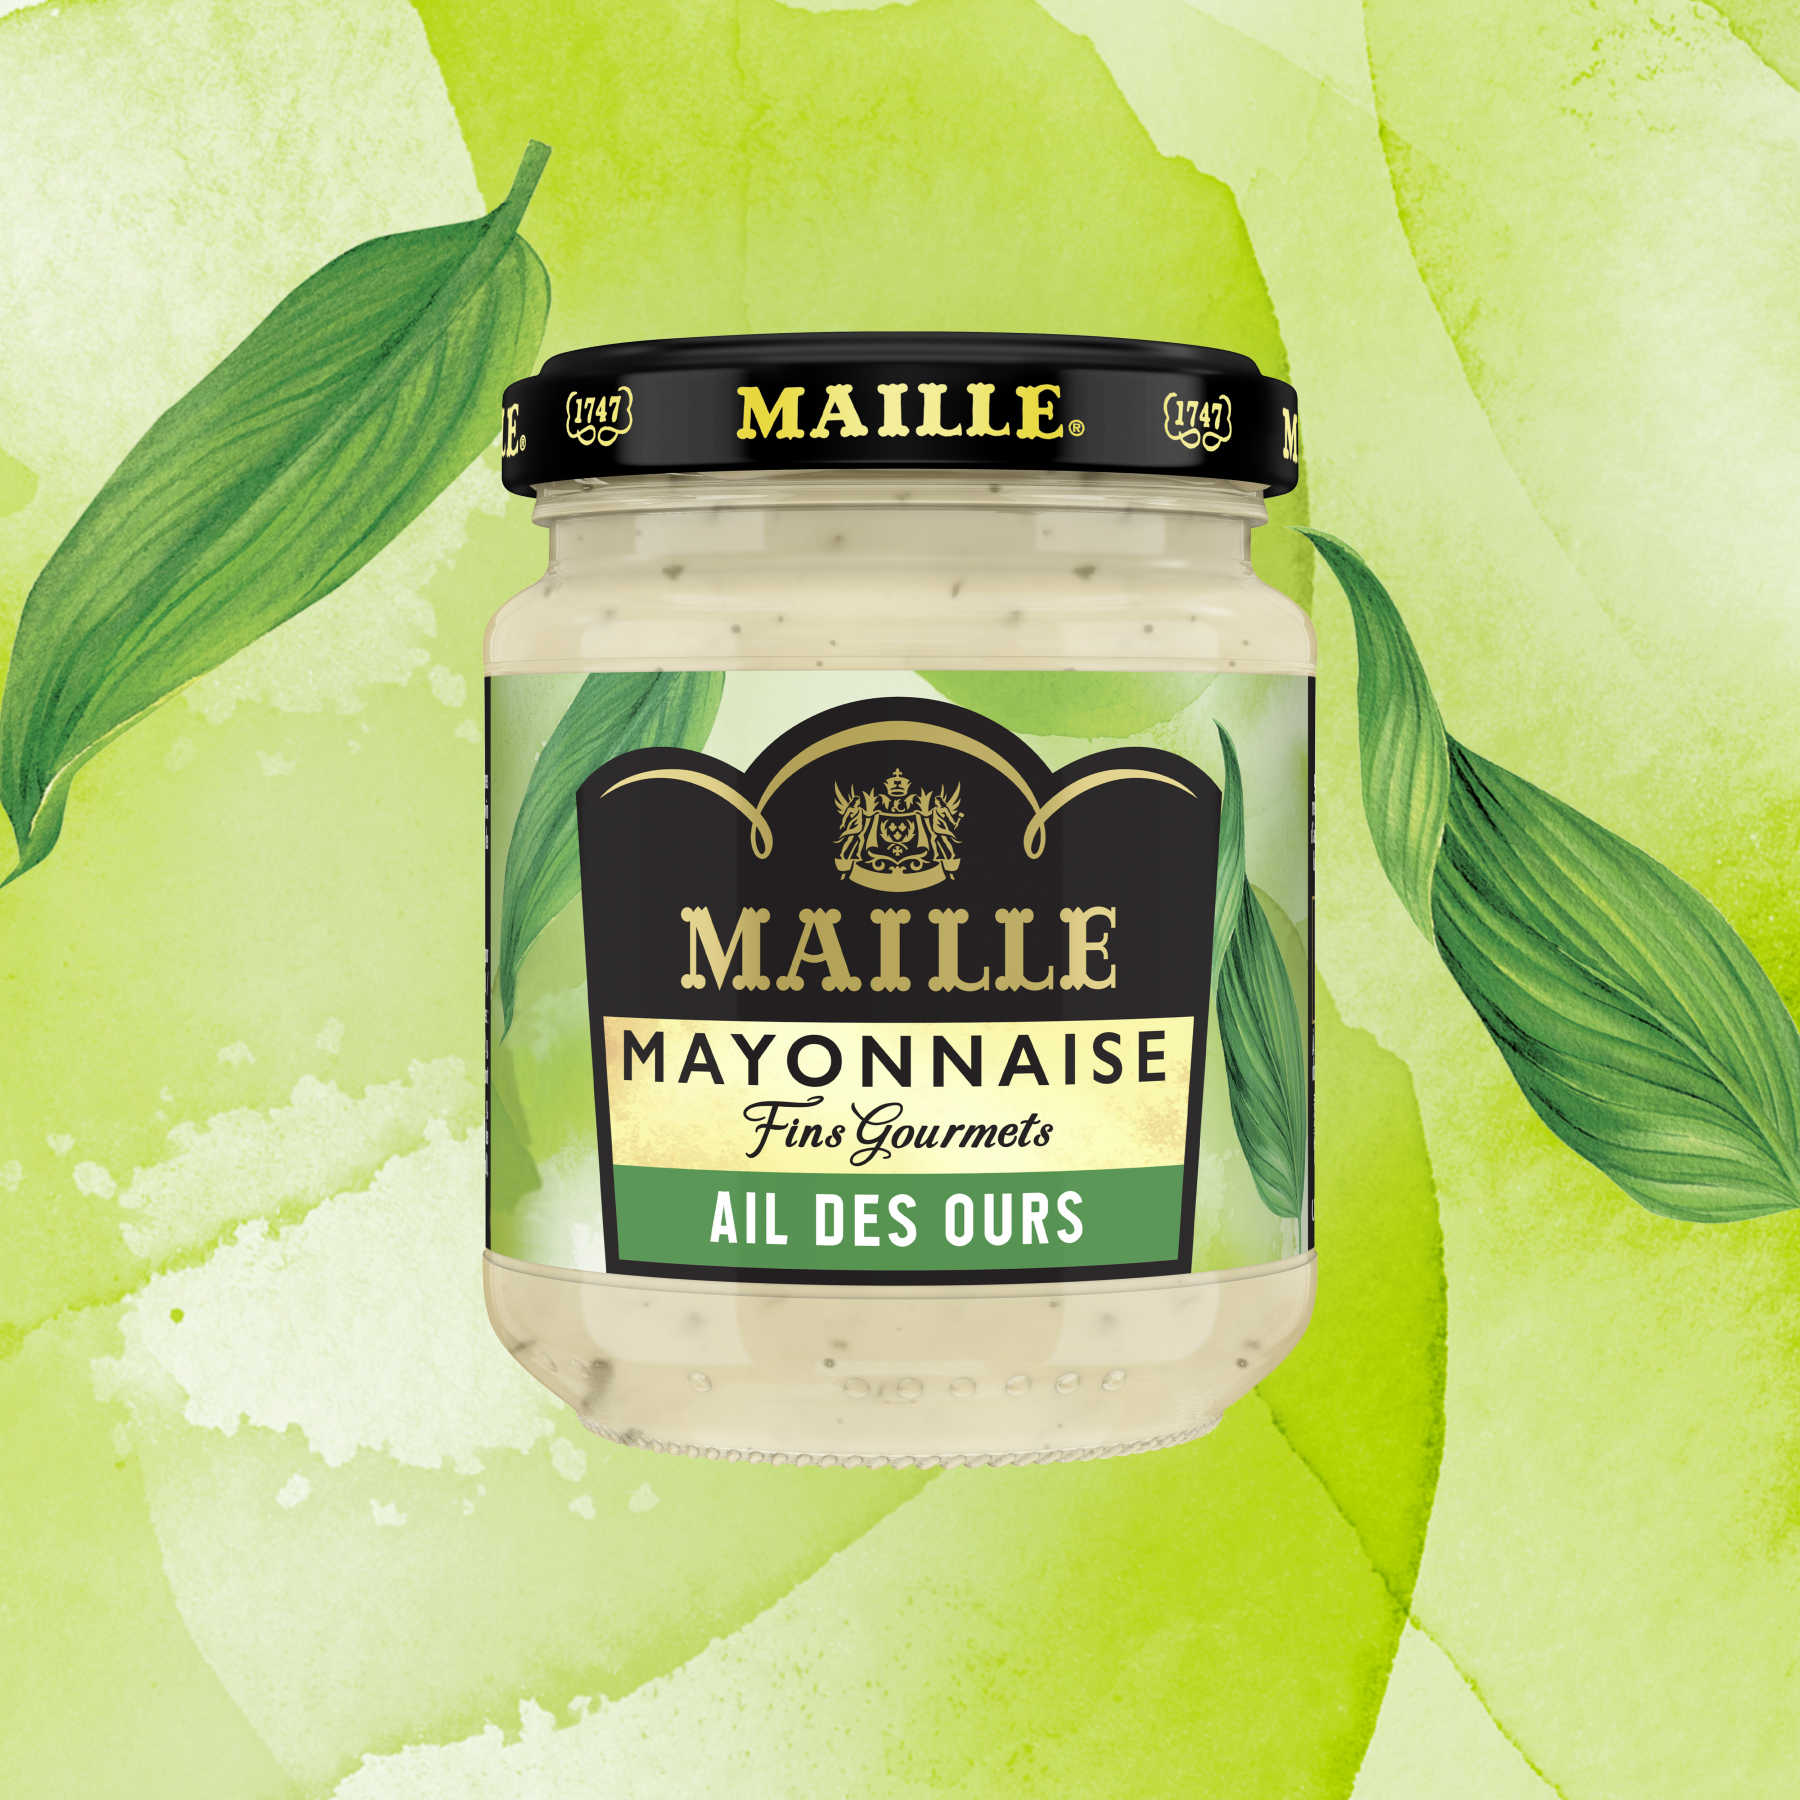 MAILLE Mayonnaise Fins Gourmets Ail des